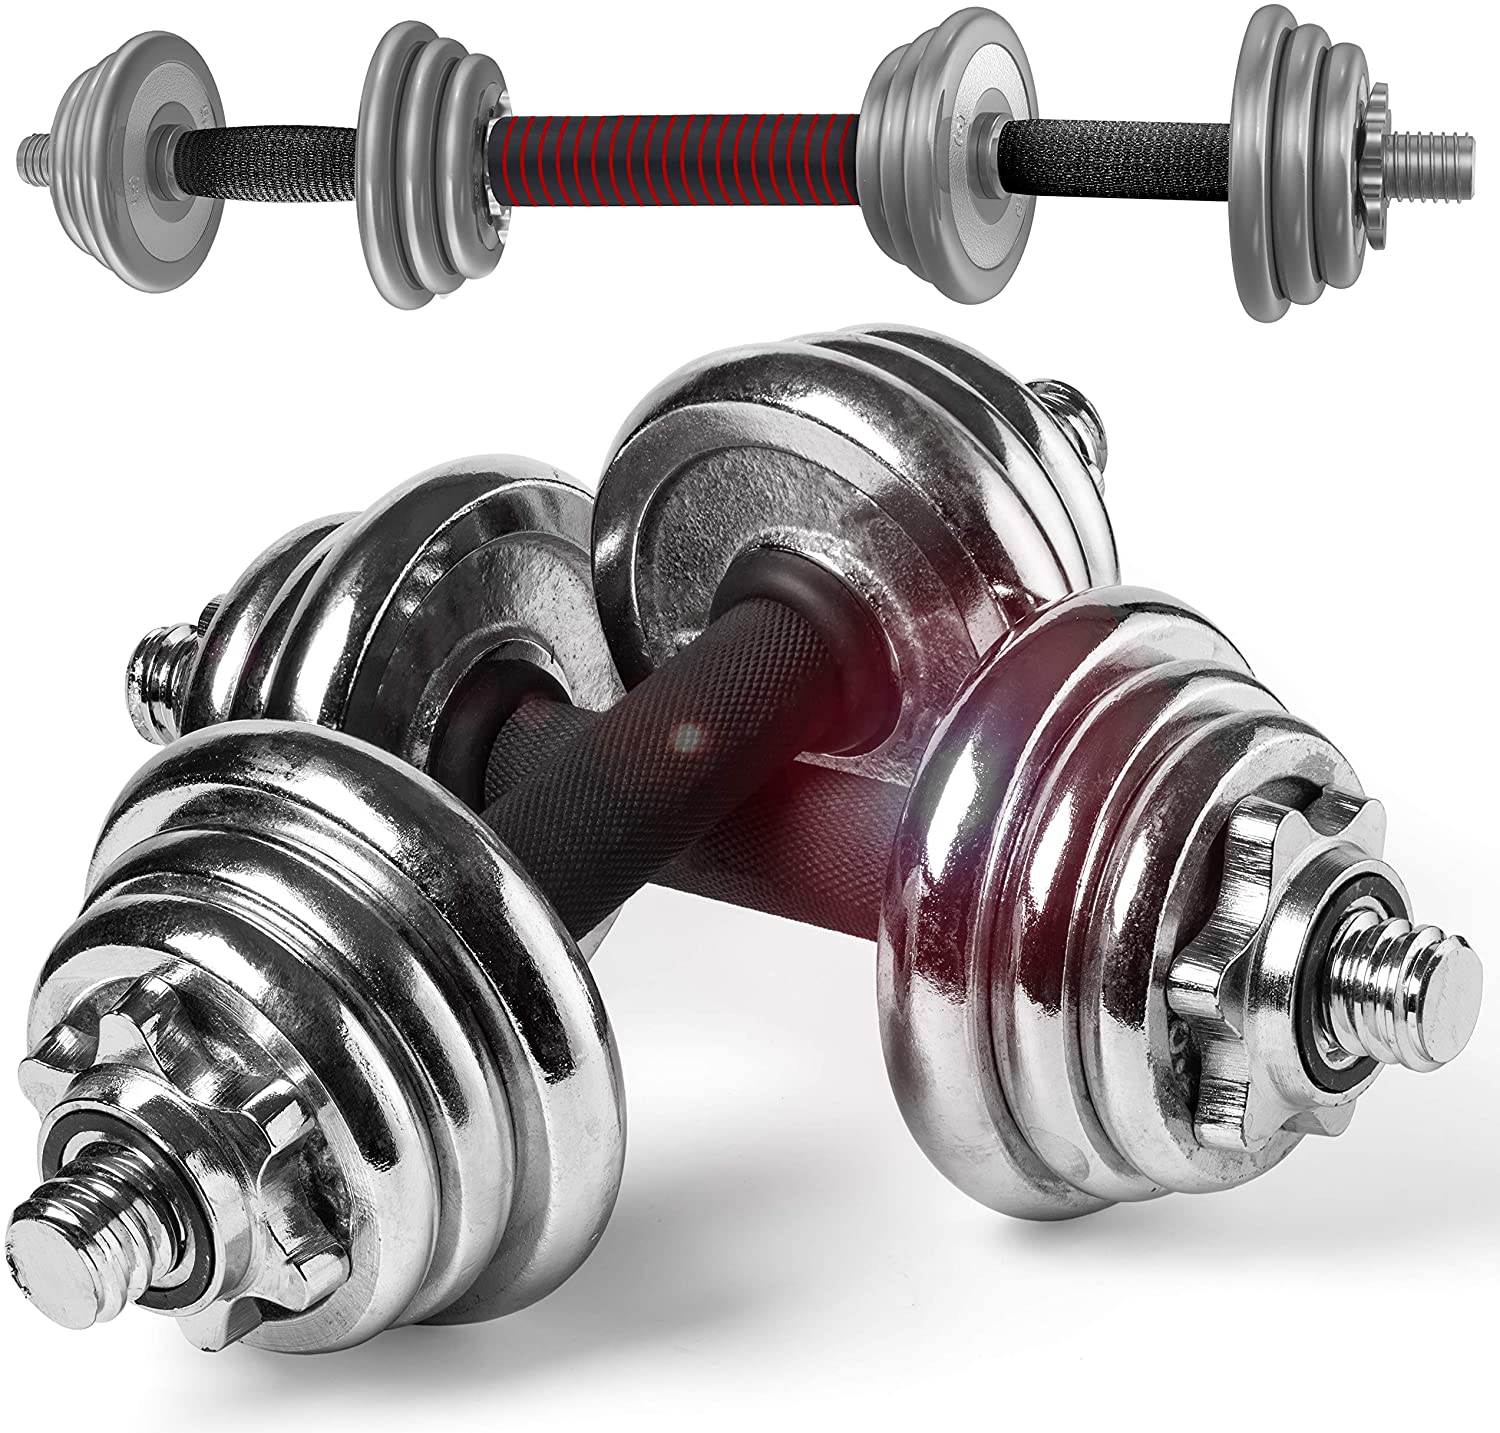 20 KG Cast Iron Dumbbell Set With Barbell Converter - 